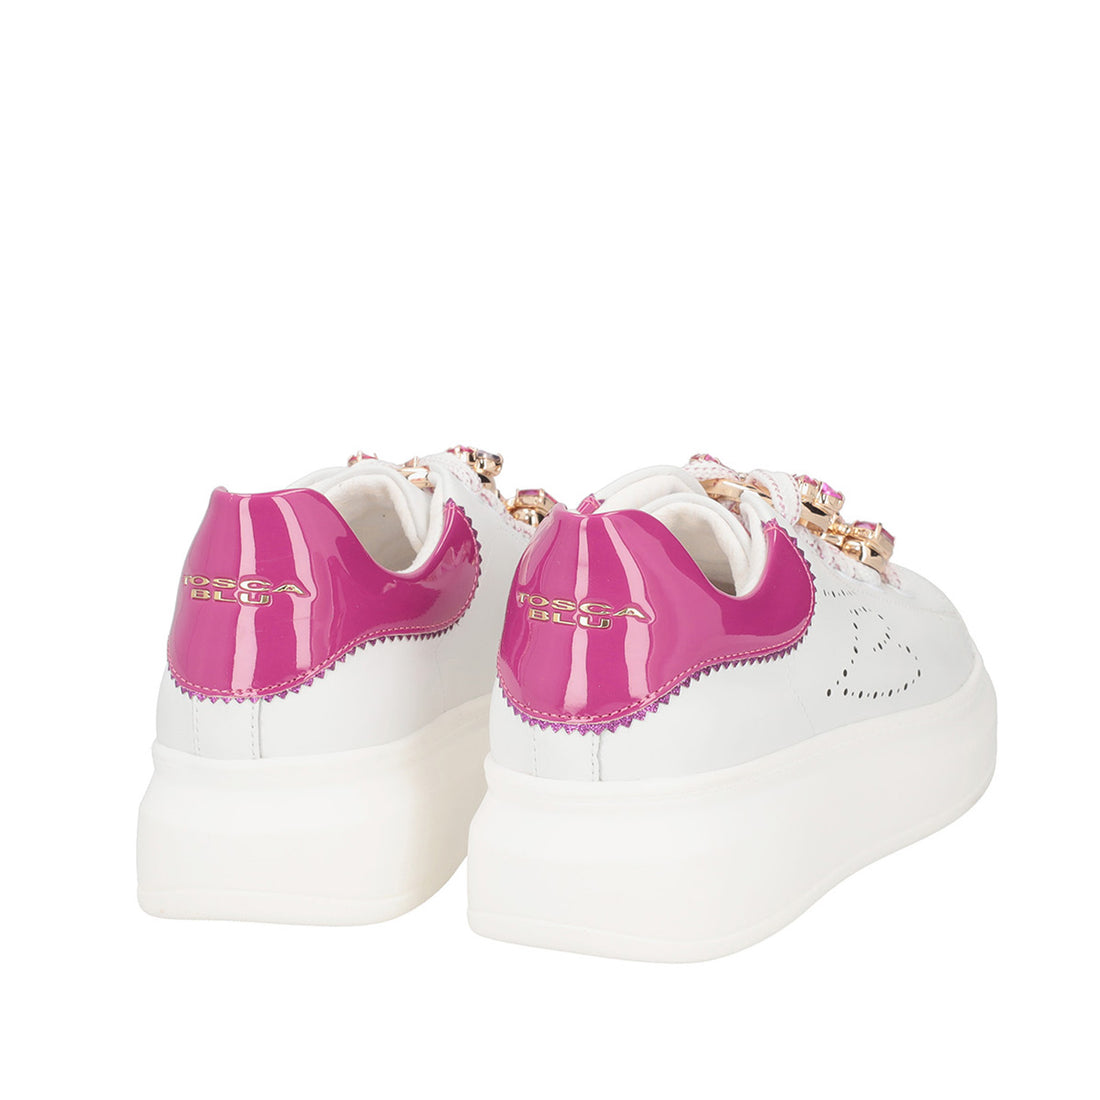 WHITE/FUXIA GLAMOUR SNEAKER WITH JEWEL ACCESSORY